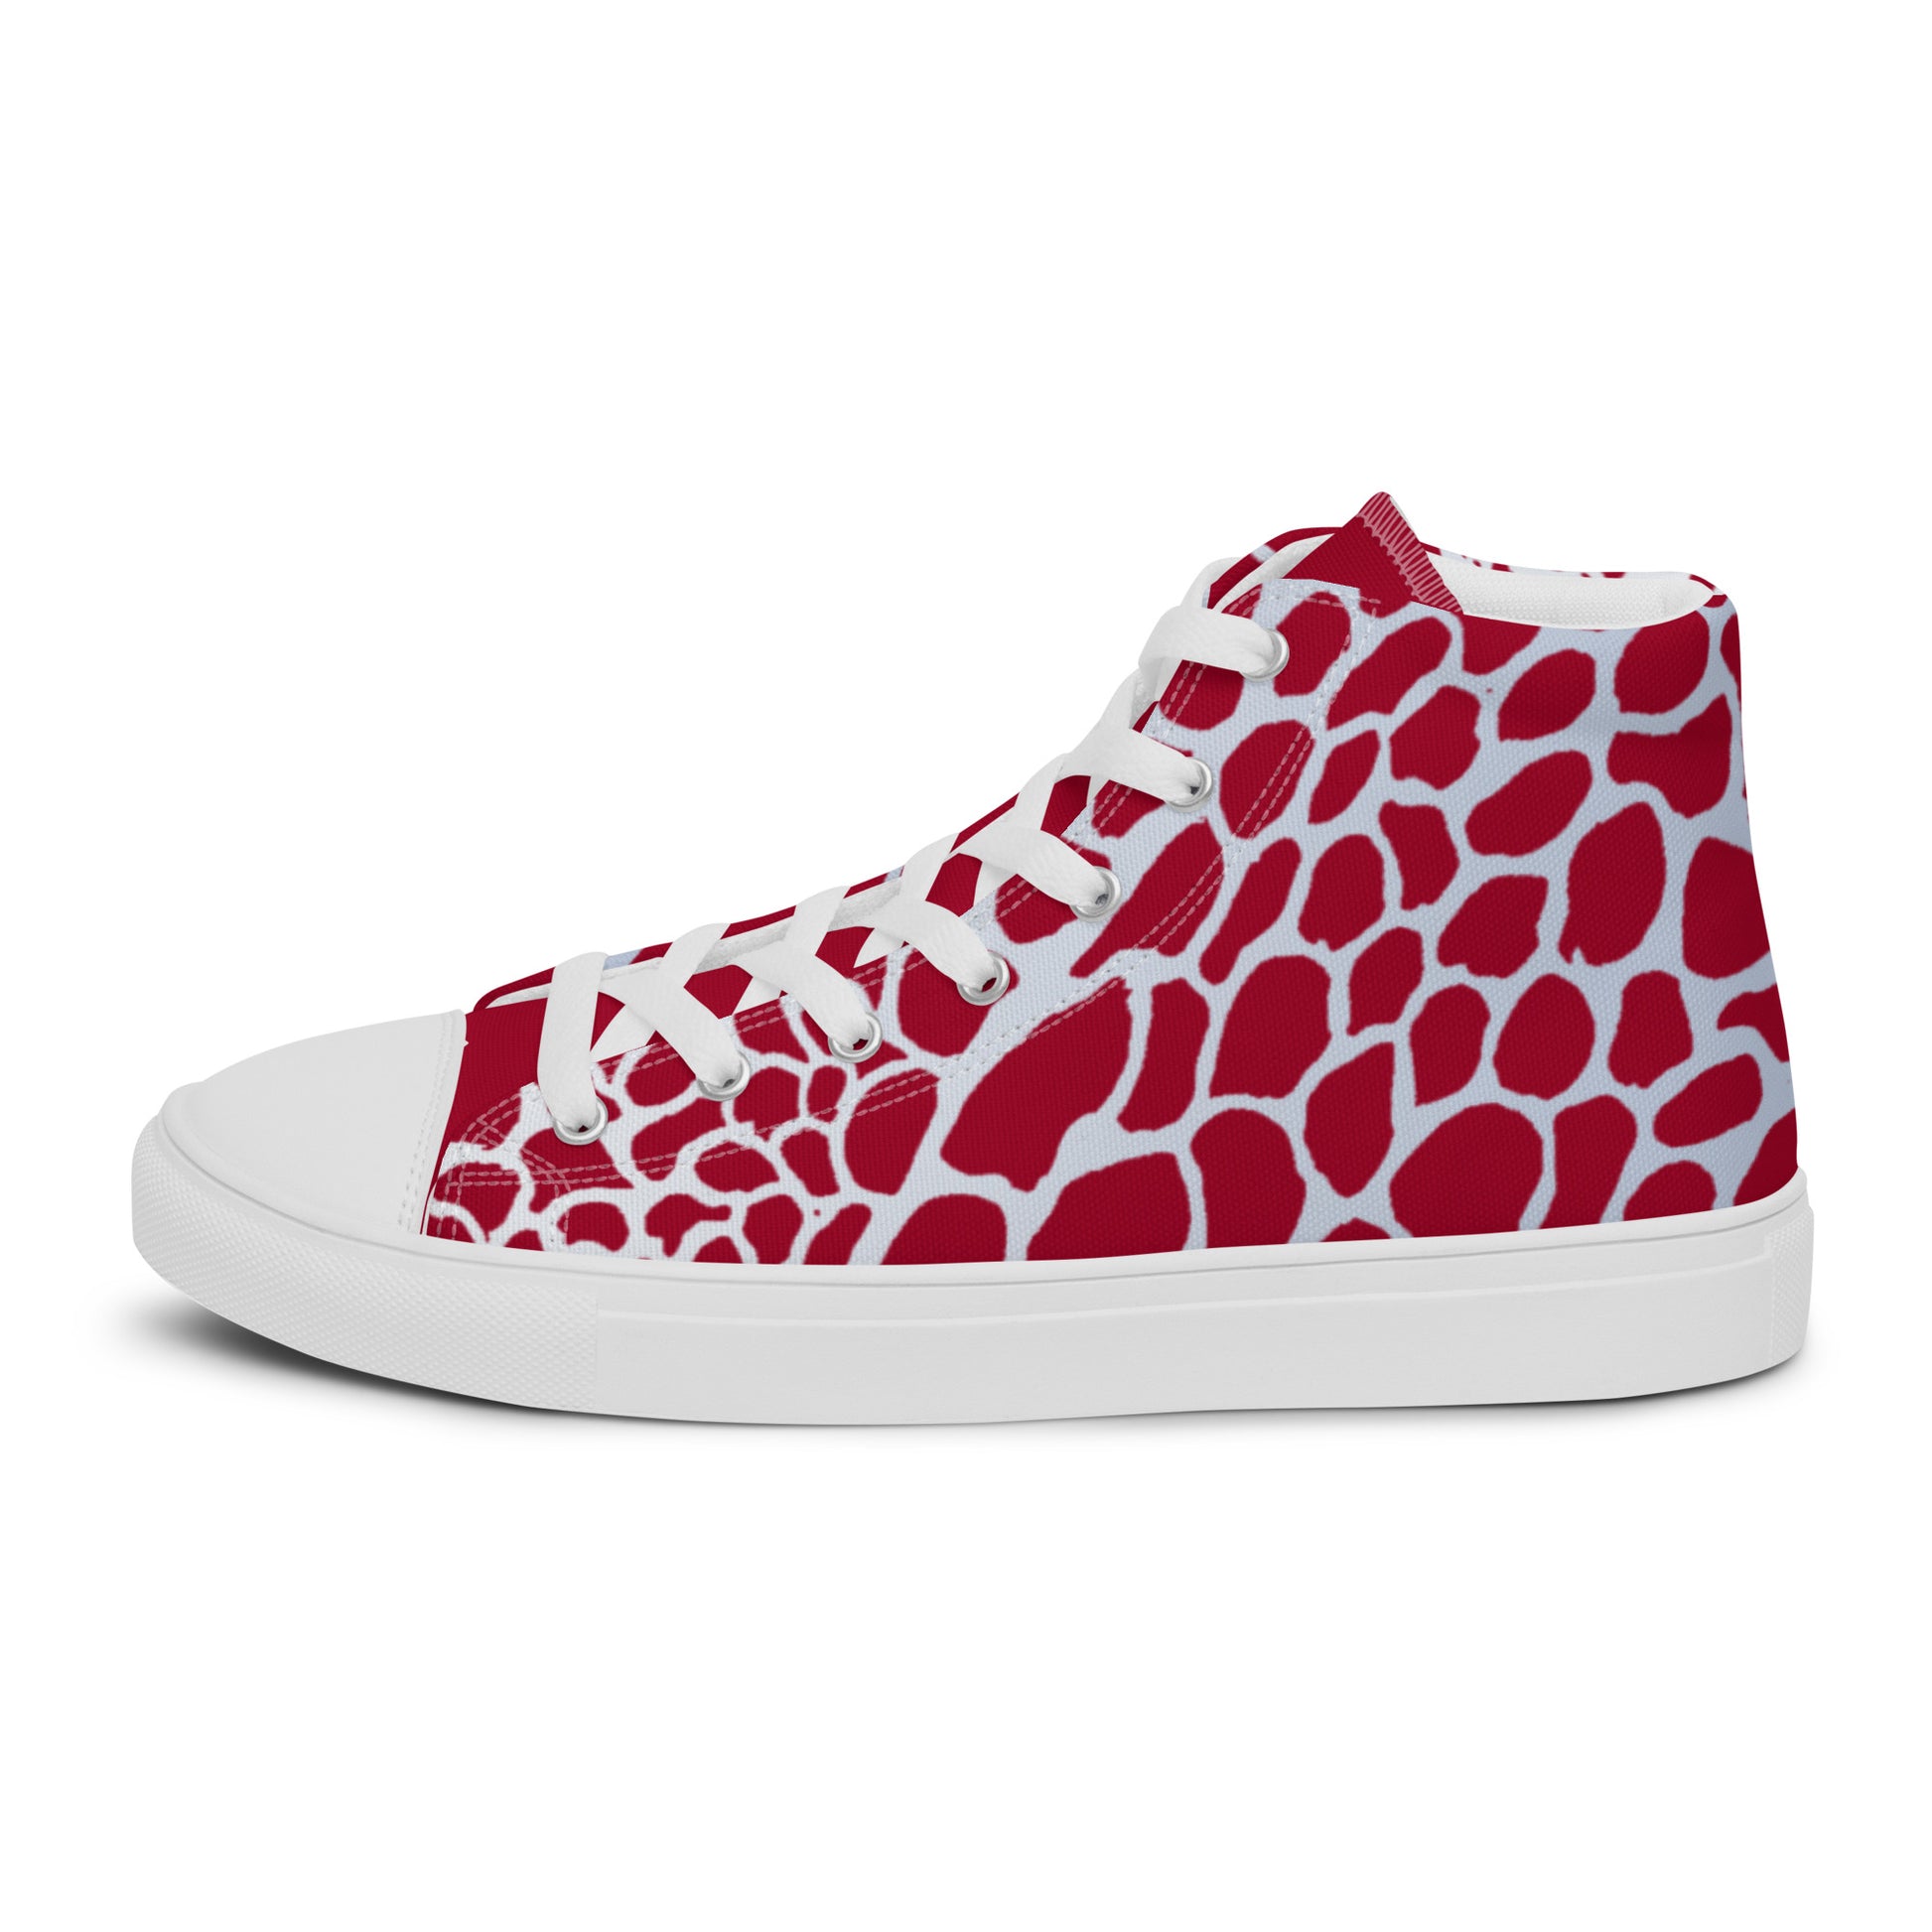 Organic Men’s High Top Canvas Shoes (Red & White) | Comfortable Print Shoes | Stylish Festival Sneakers | Comfortable Culture - Comfortable Culture - 5 - Shoes - Comfortable Culture